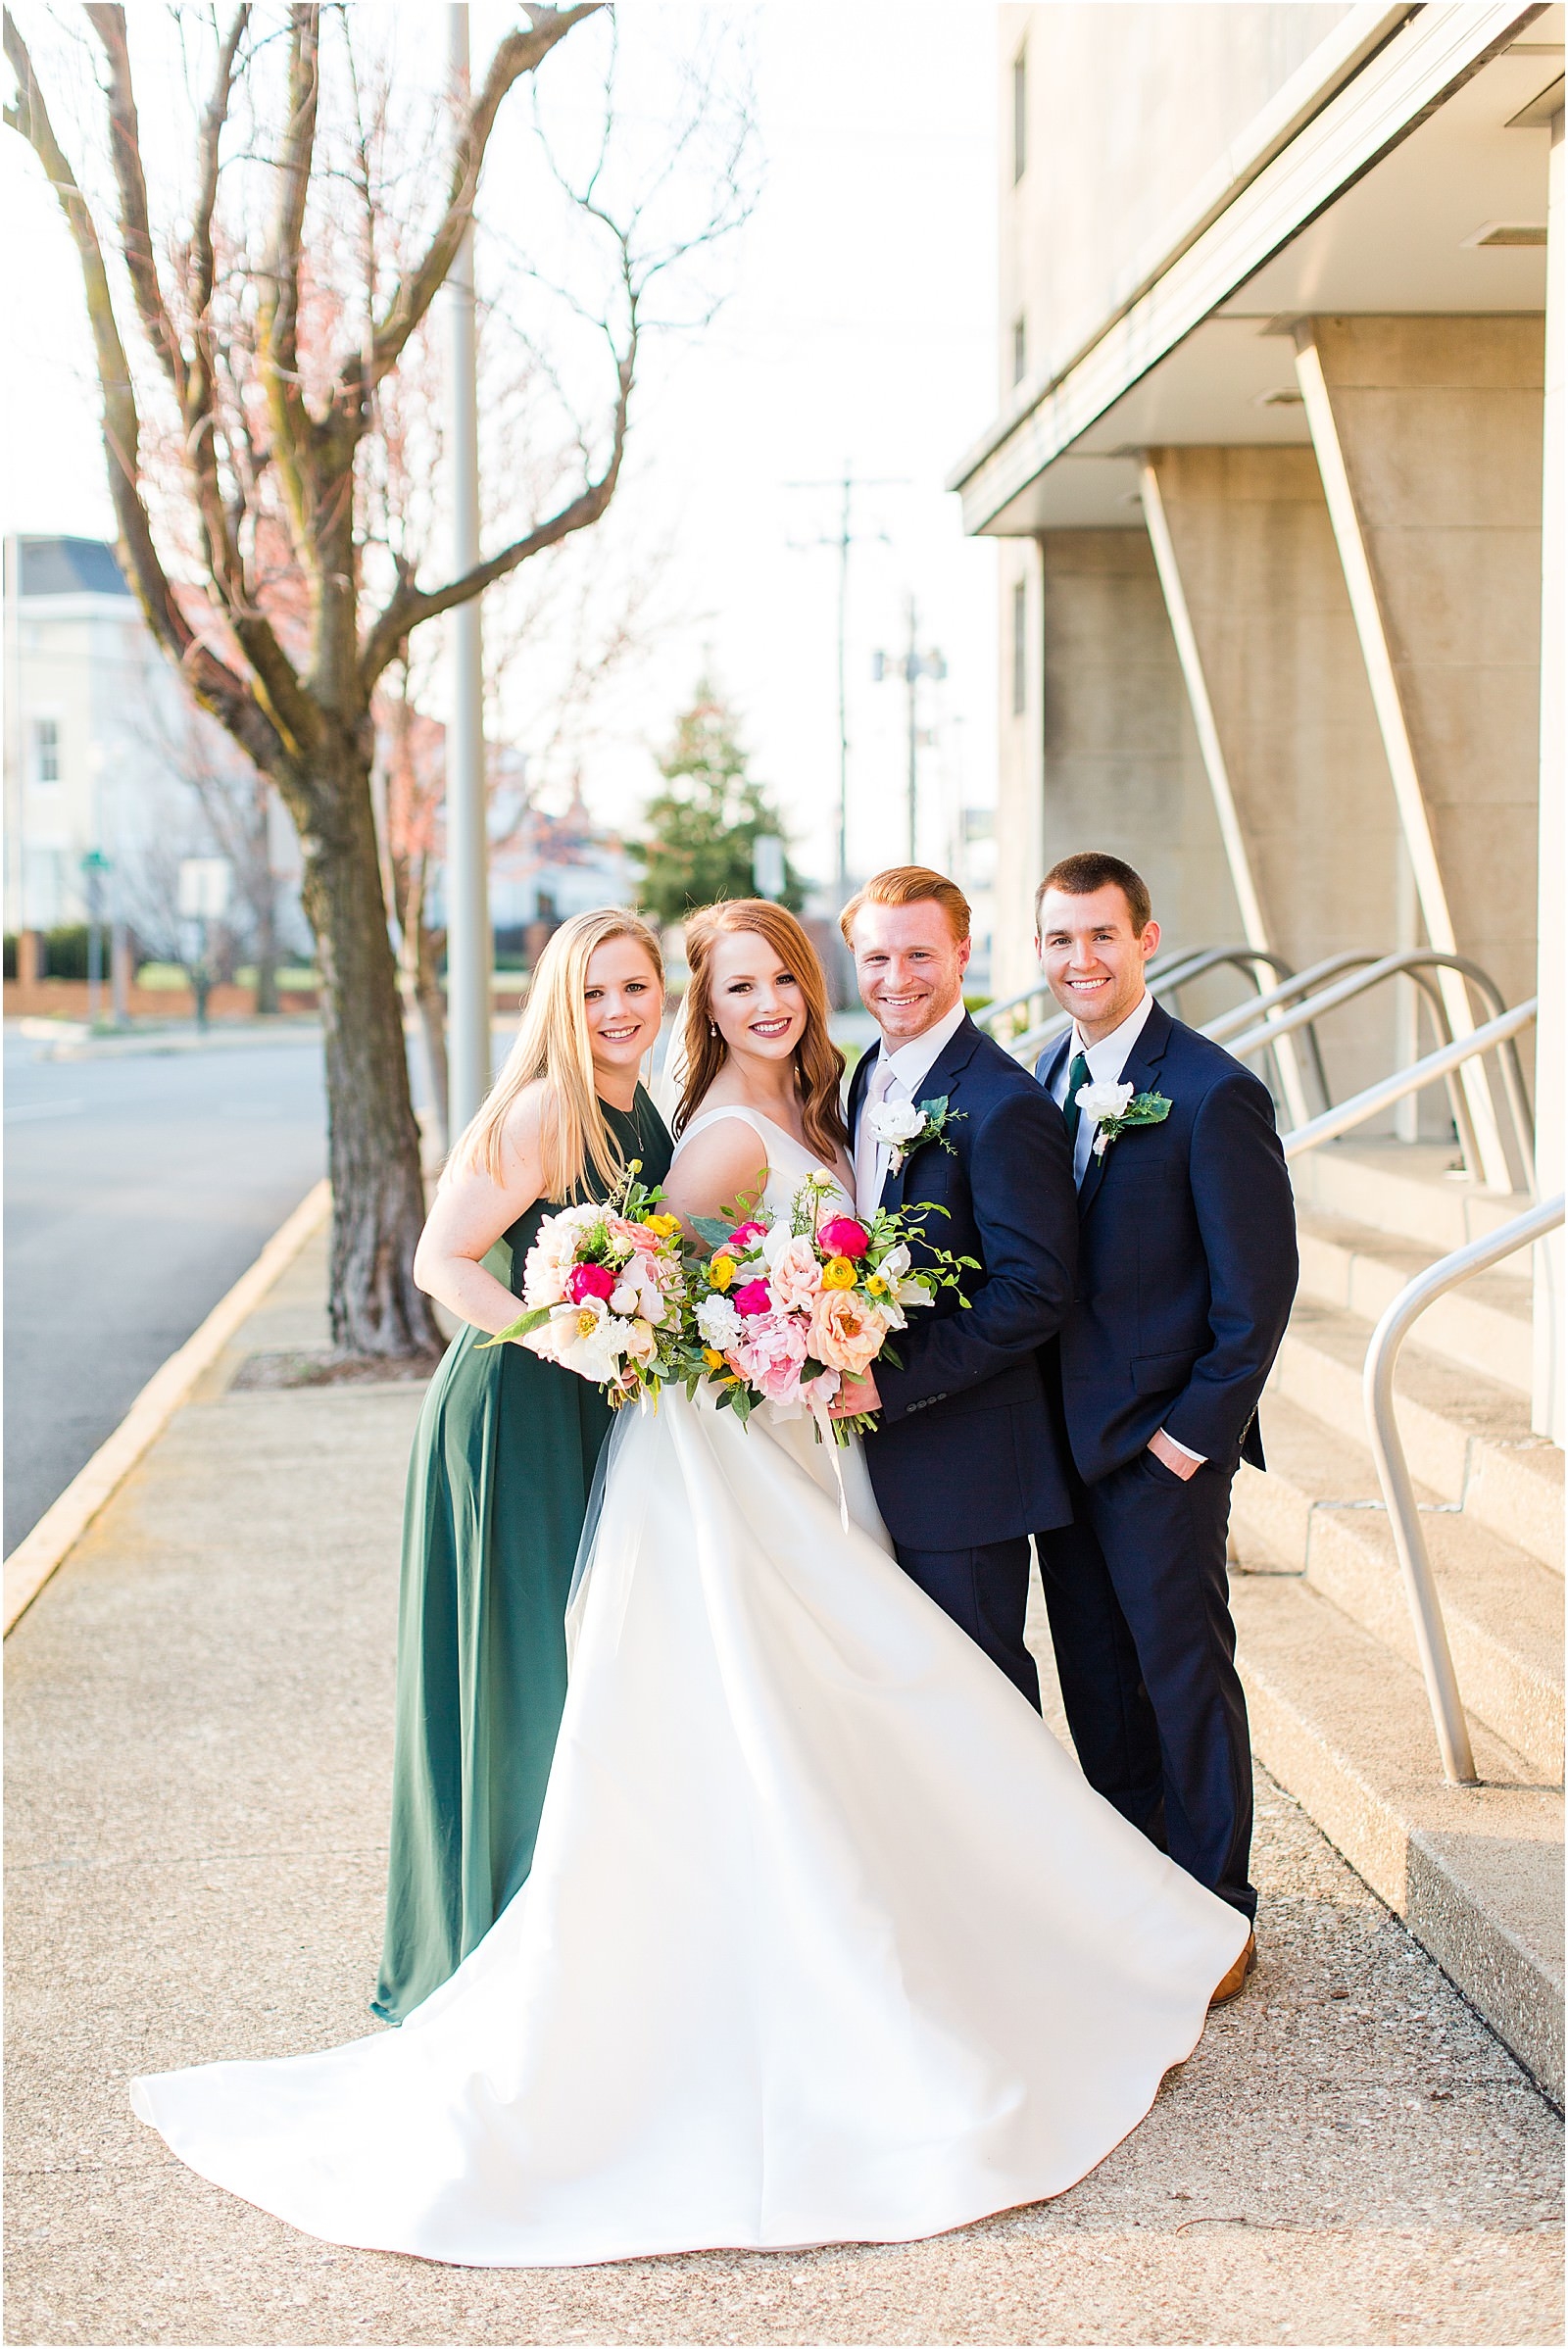 A Perfectly Intimate Wedding in Downtown Evansville Indiana | Jennah and Steve | Bret and Brandie Photography | | 0079.jpg